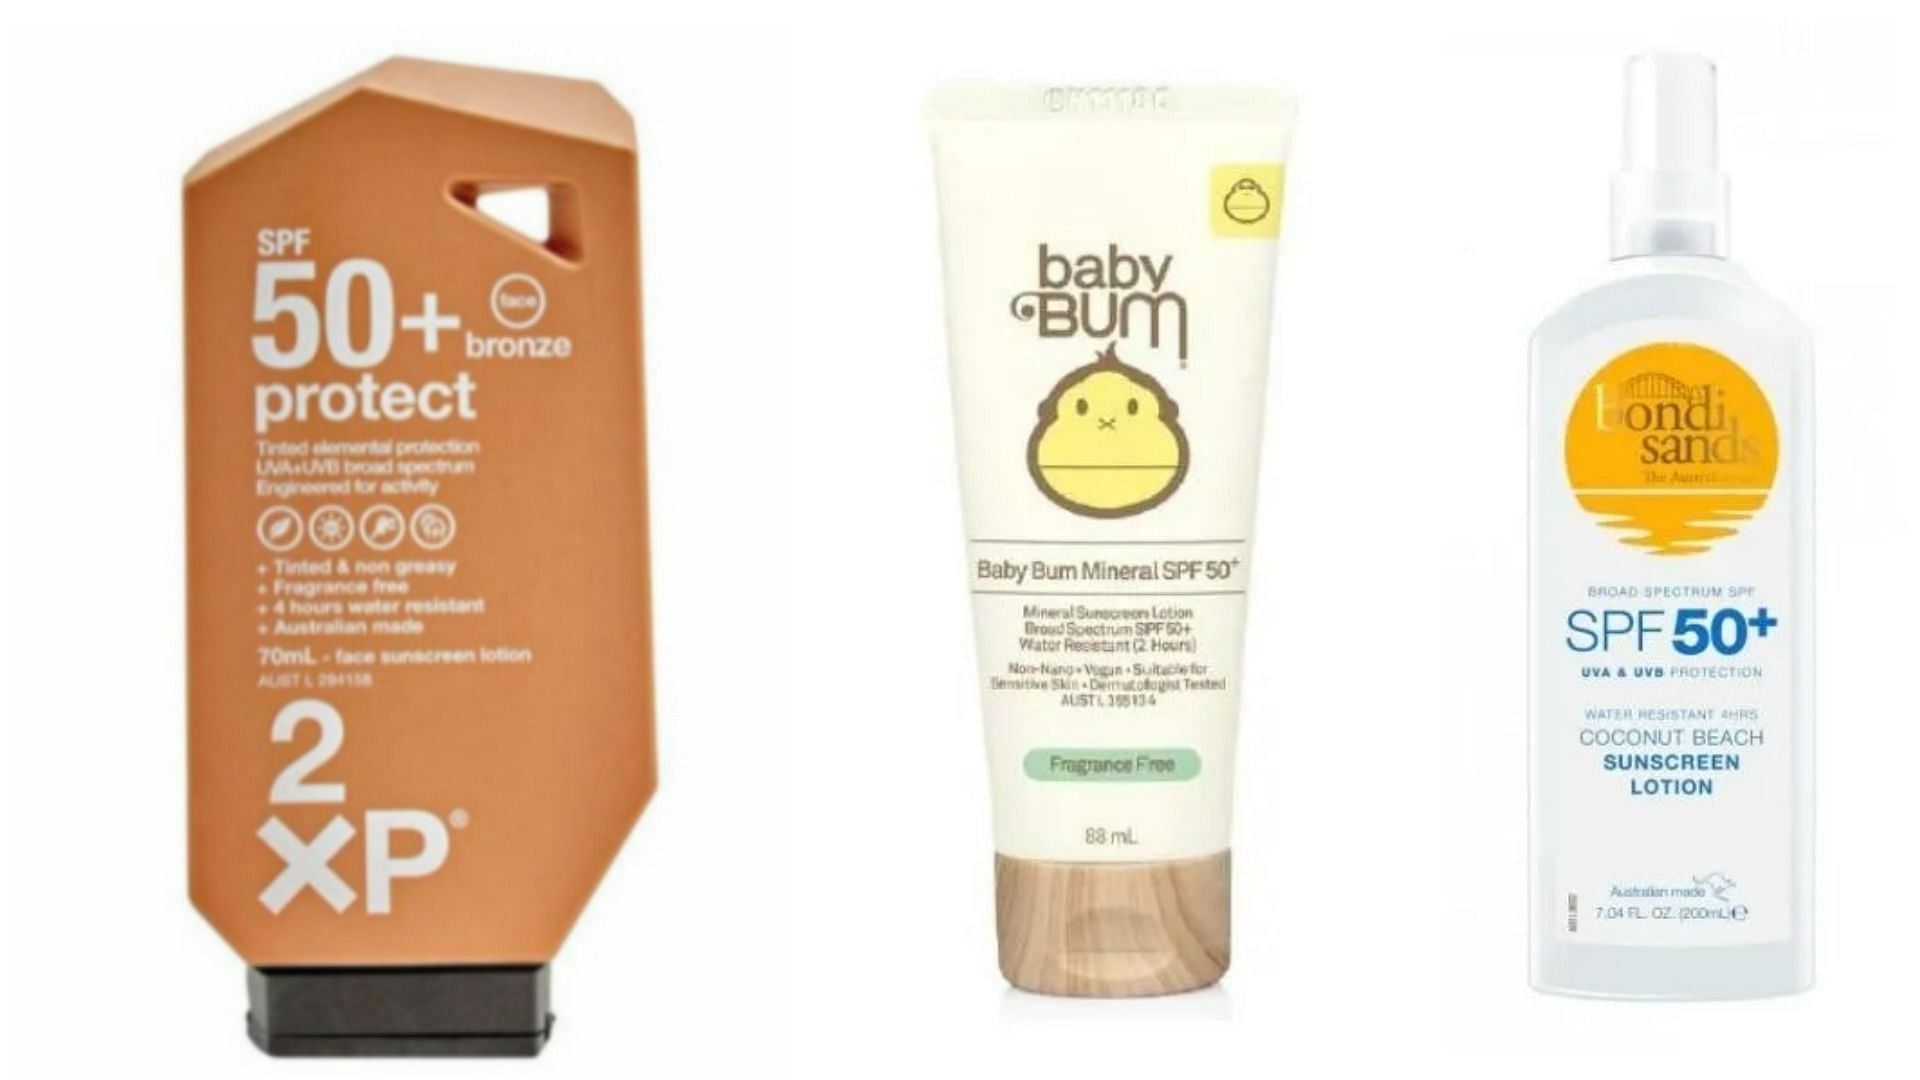 Other sun-protectants which have been recalled in Australia (Image via Shutterstock and Amazon)